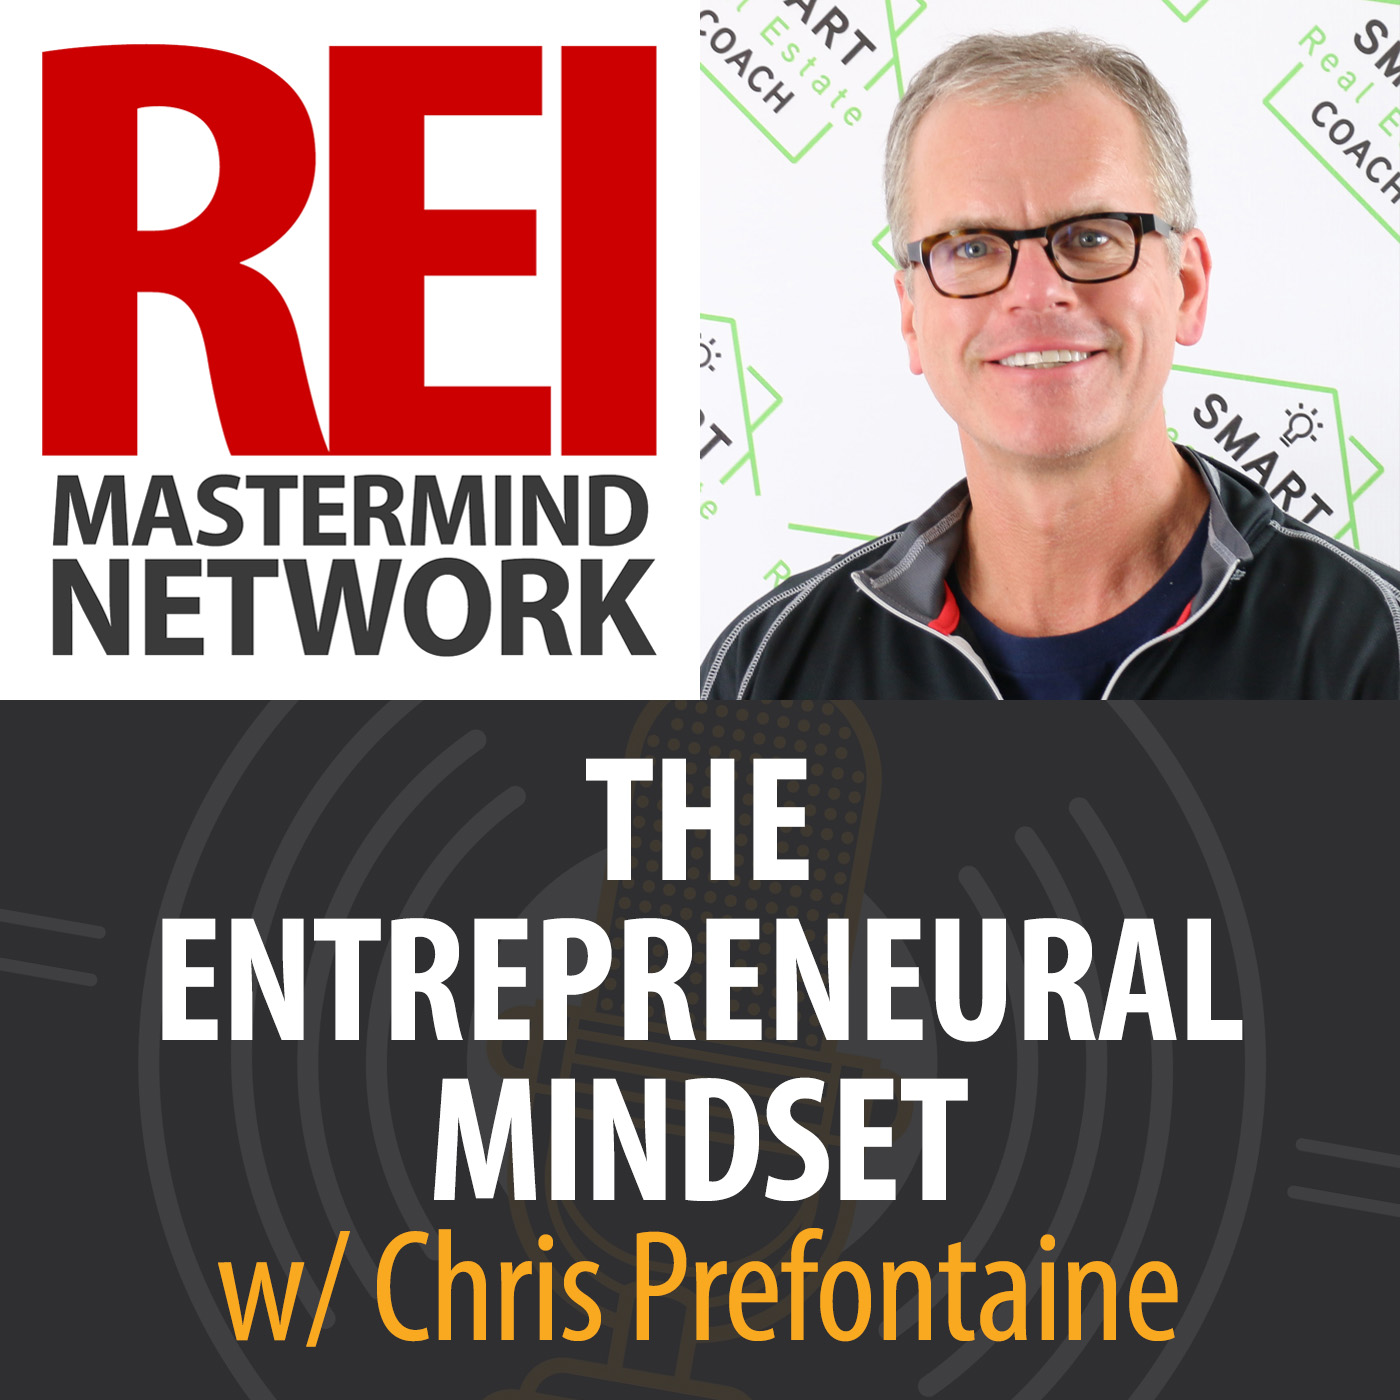 The Entrepreneurial Mindset with Chris Prefontaine Image